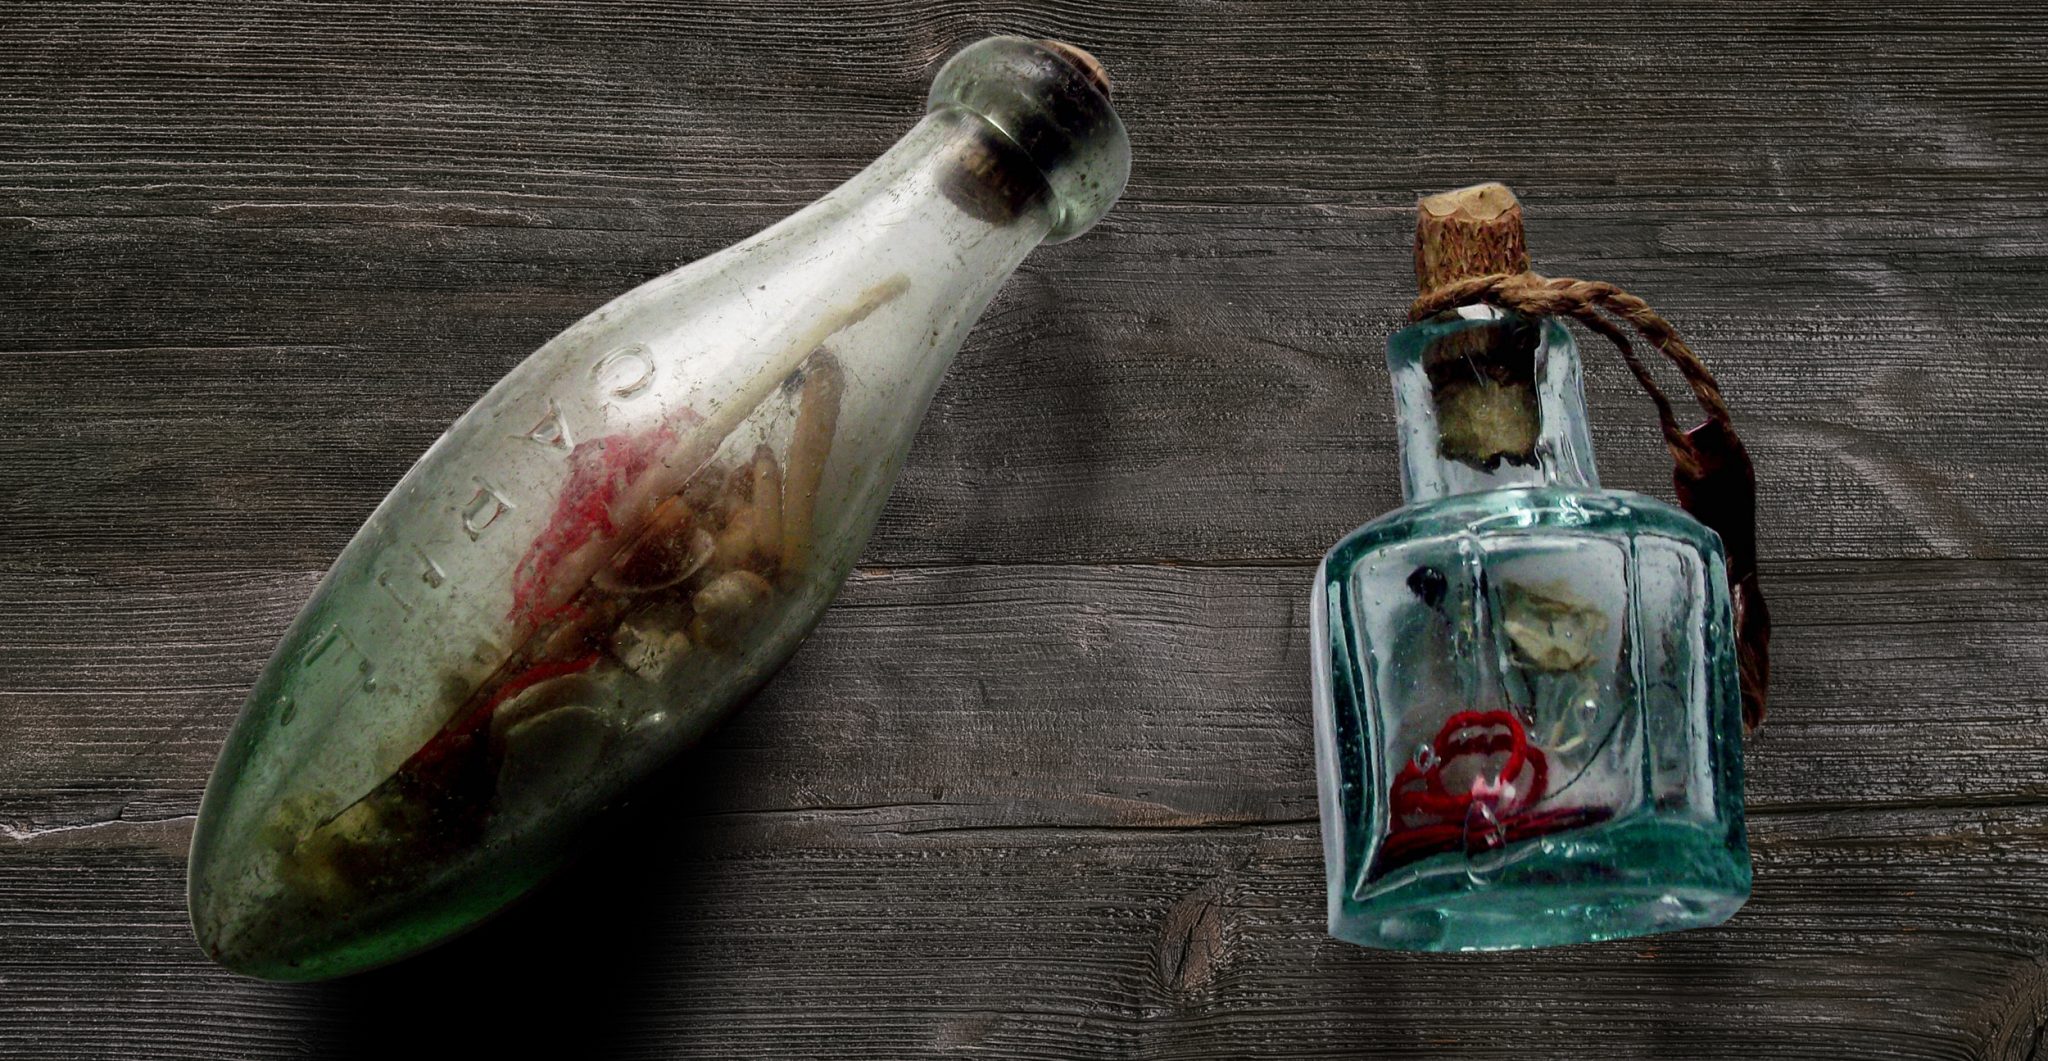 Witch bottles. Photo by Malcolm Lidbury CC by 3.0